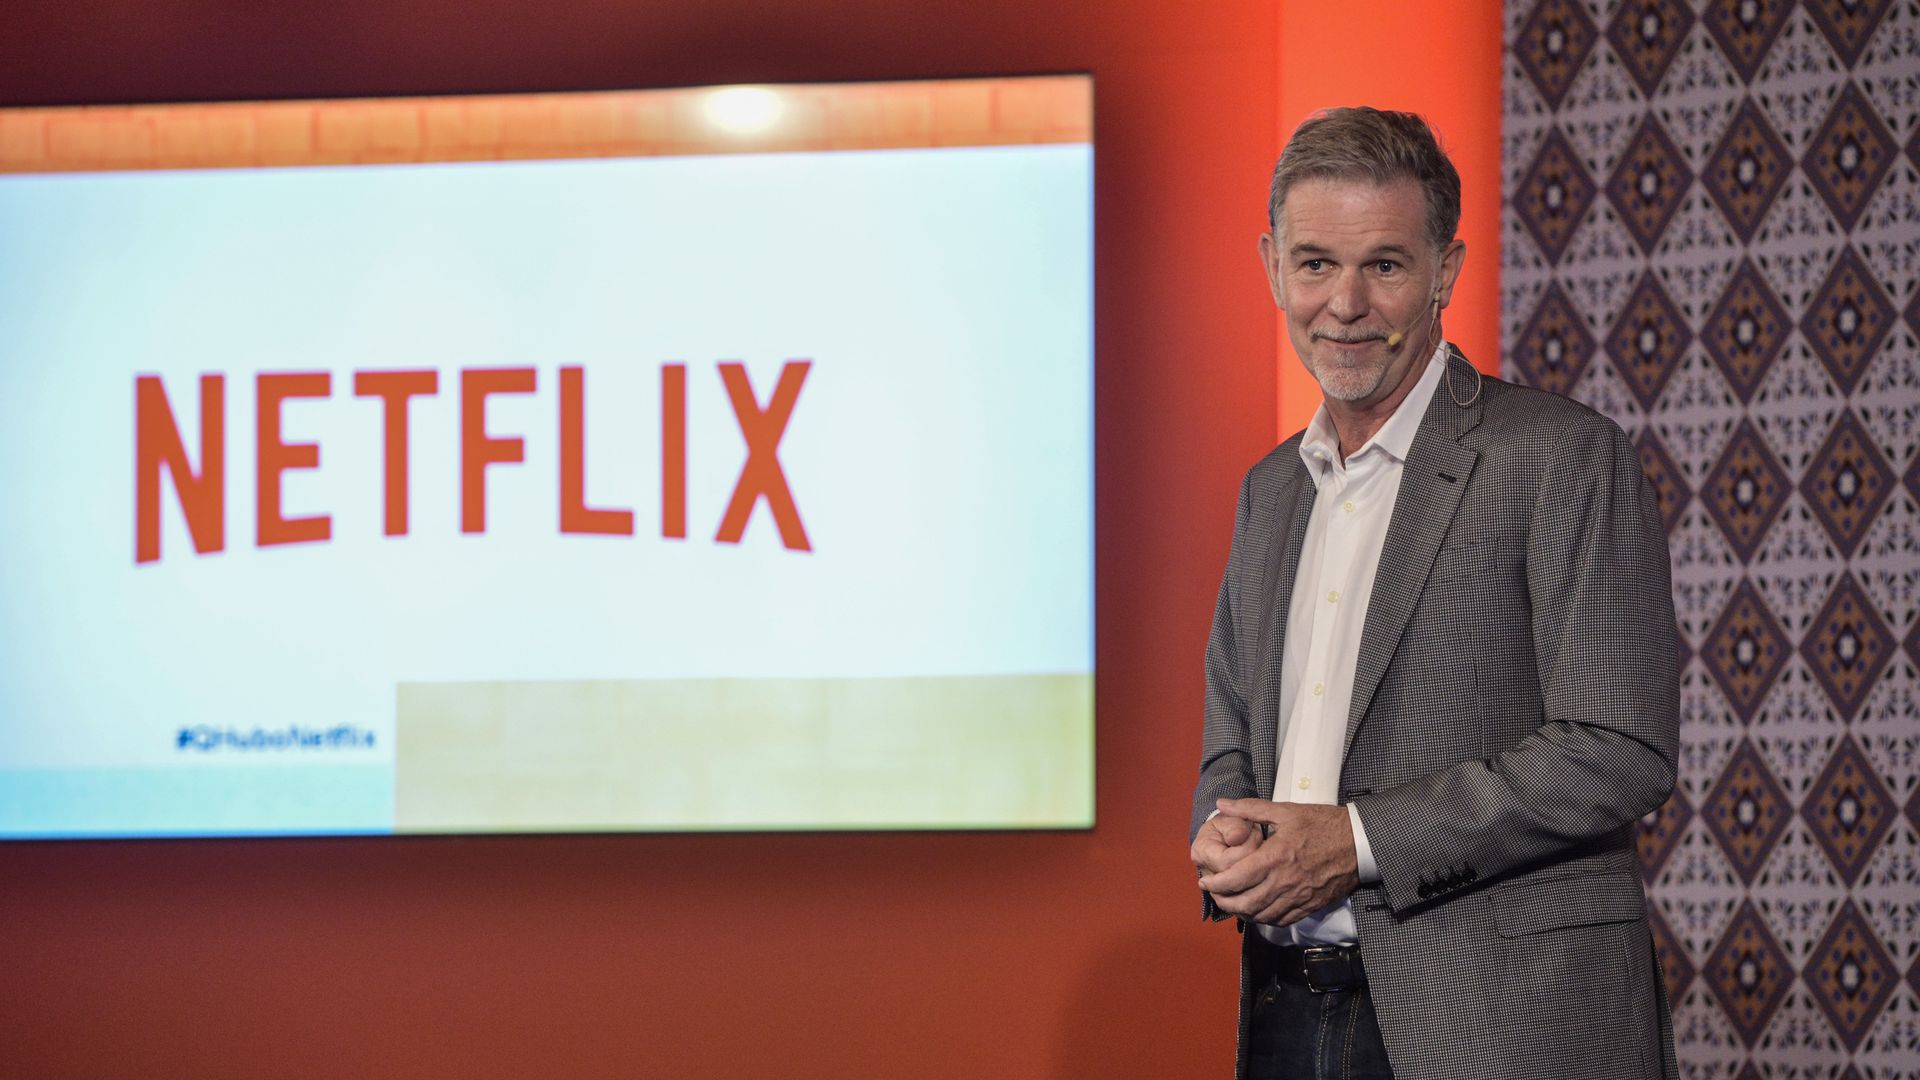 Reed Hastings standing on a stage with the Netflix logo on a screen in the background.